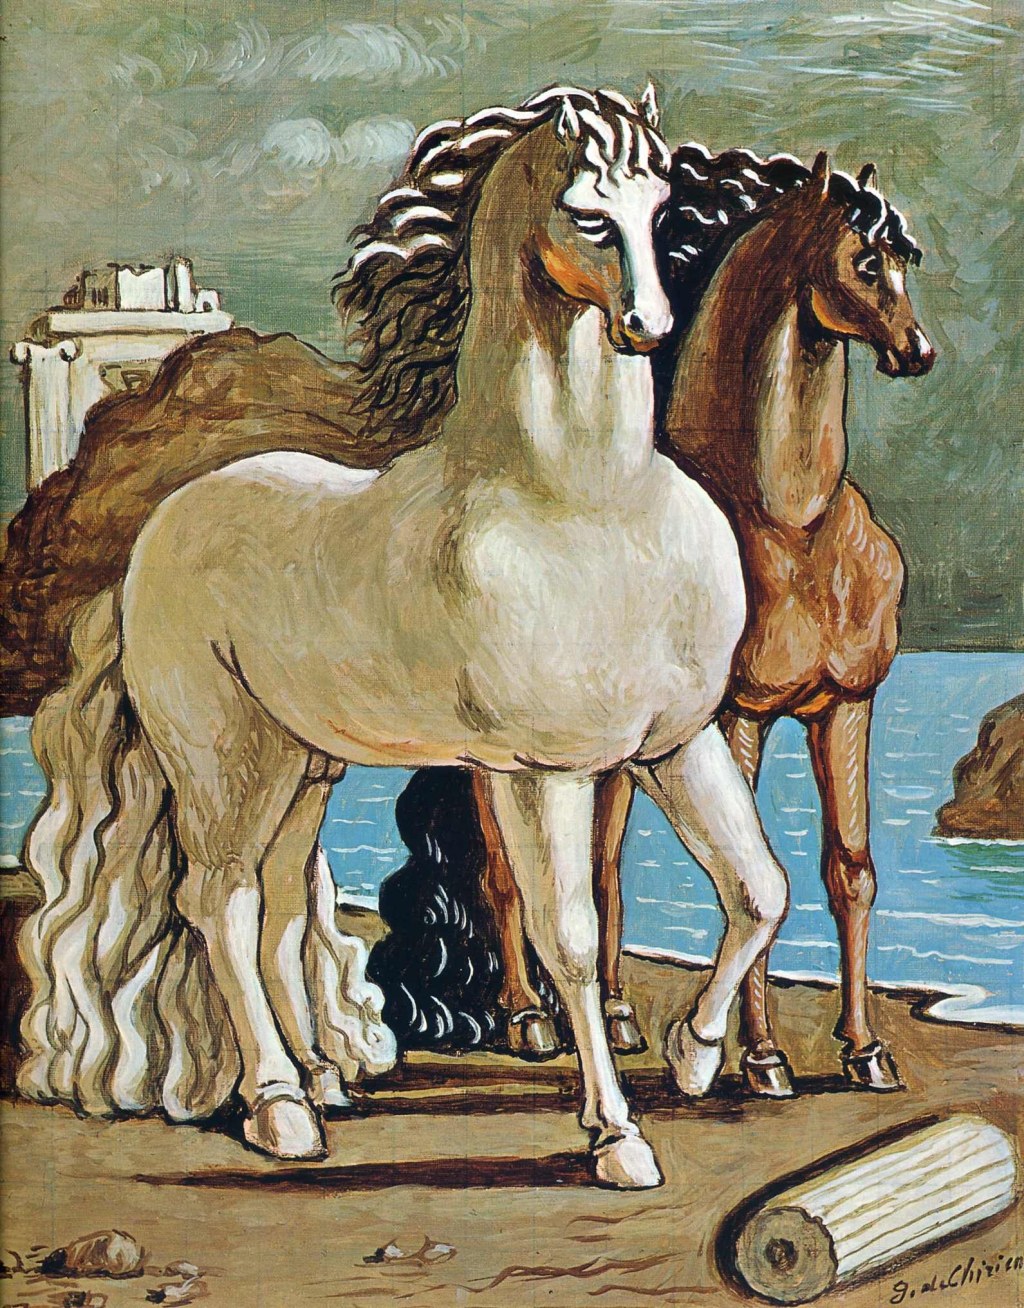 Picture of: Two Horses by a Lake, c. – Giorgio de Chirico – WikiArt